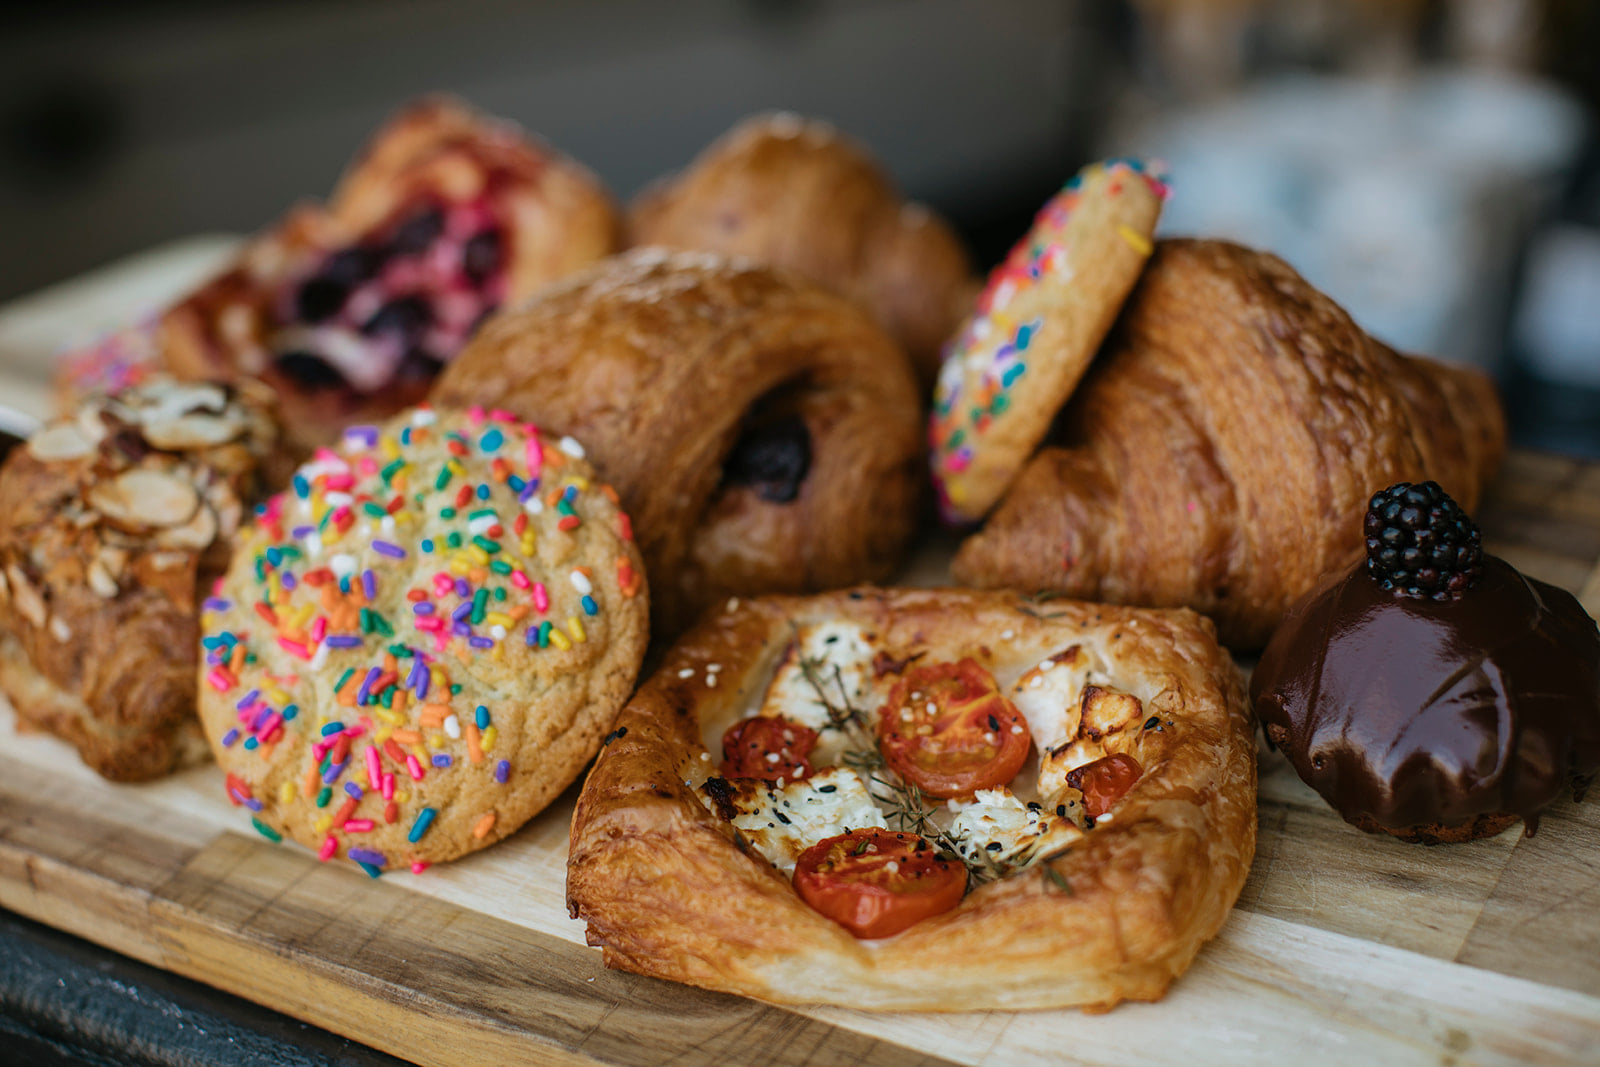 Selection of pastries